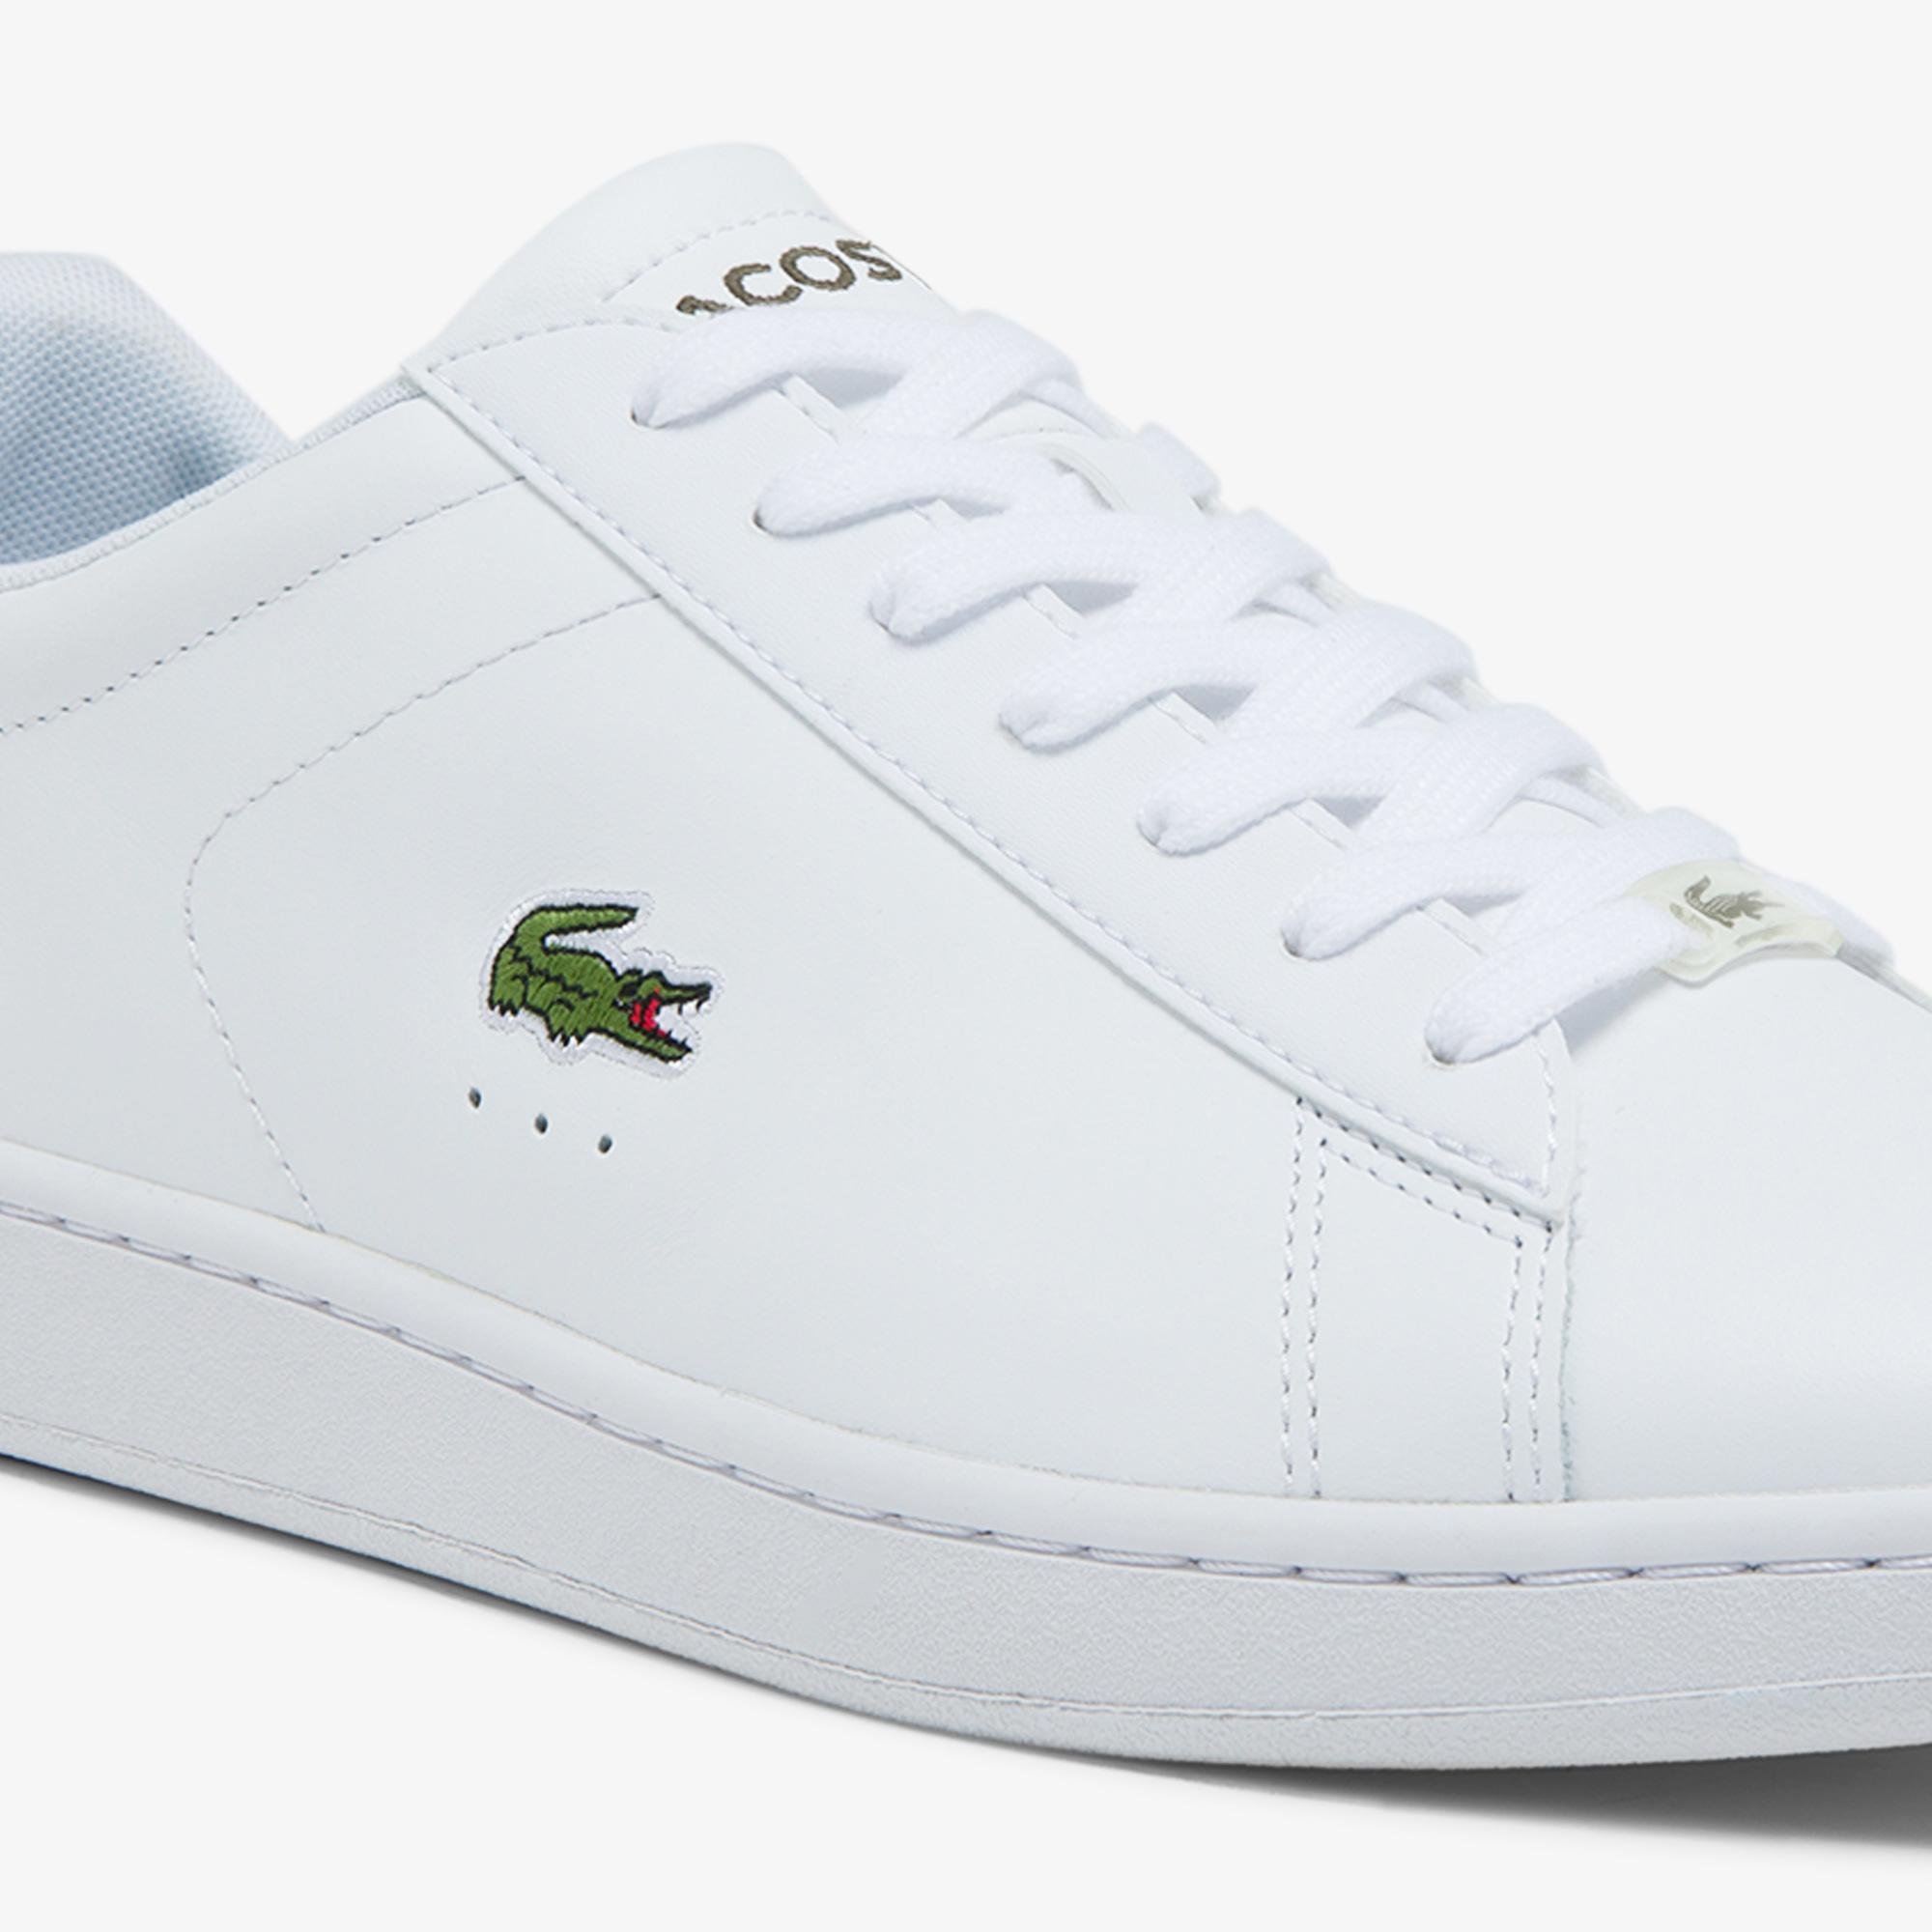 Lacoste Men's Carnaby Evo Leather and Synthetic Sneakers